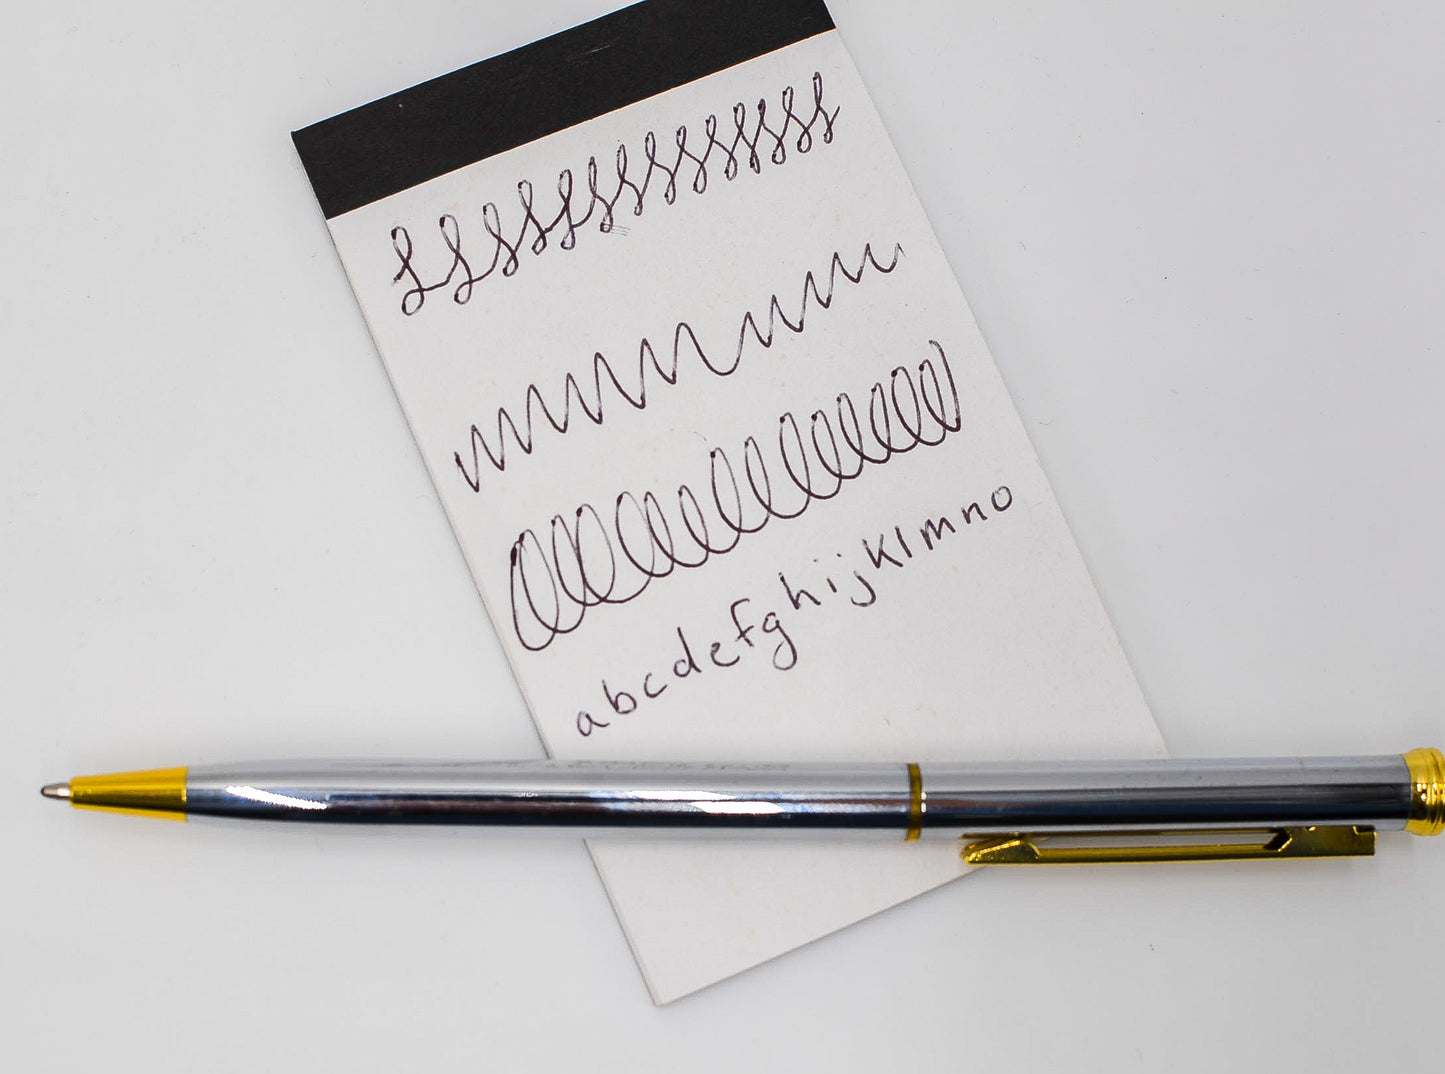 Pens: Silver and Gold Ballpoint Pen with Black Ink